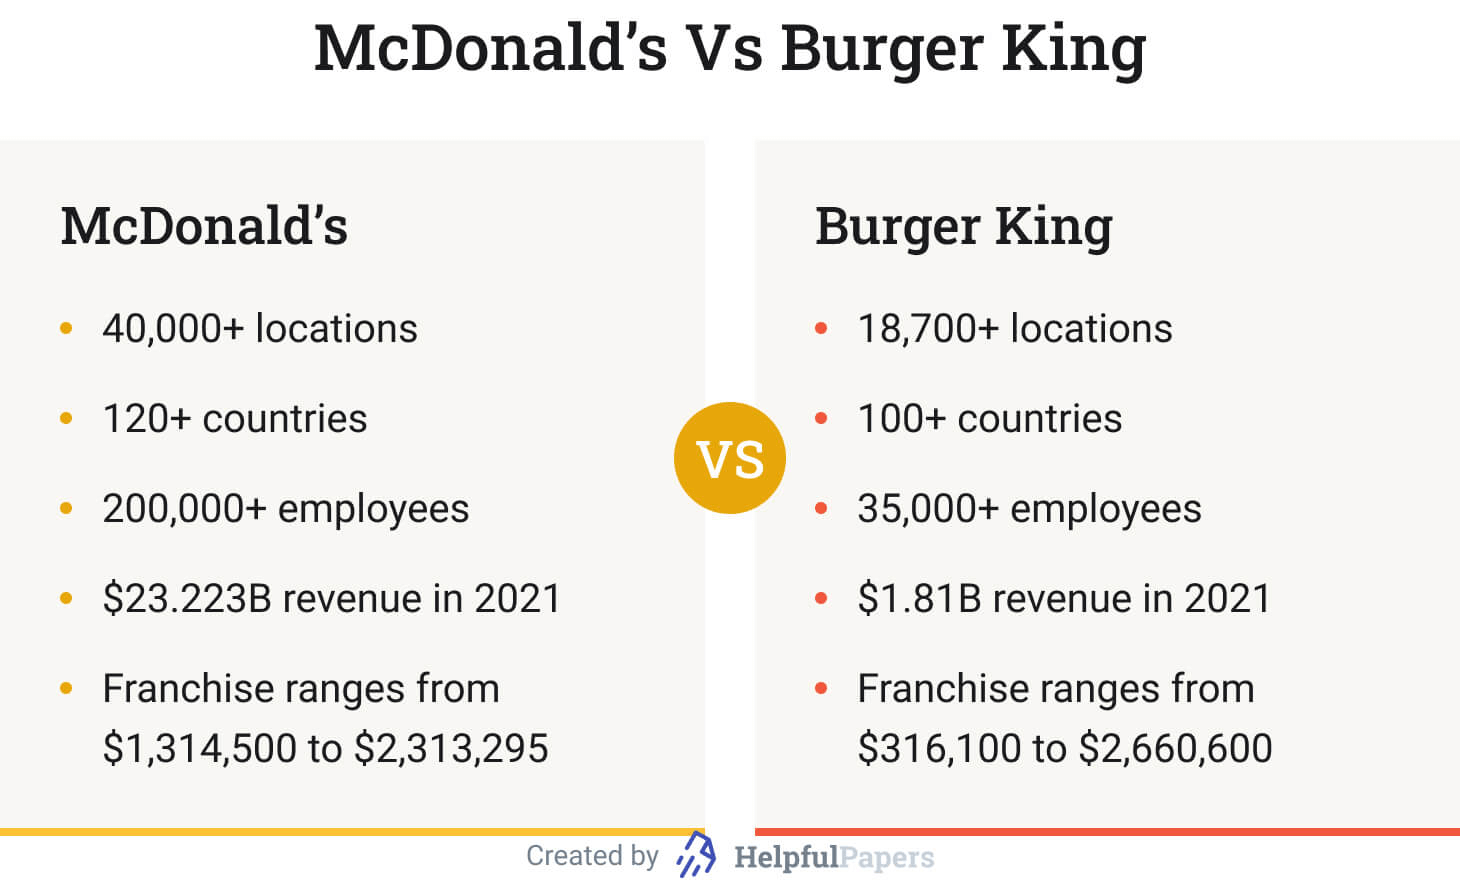 The picture provides a comparison of McDonald's and Burger King in different aspects.